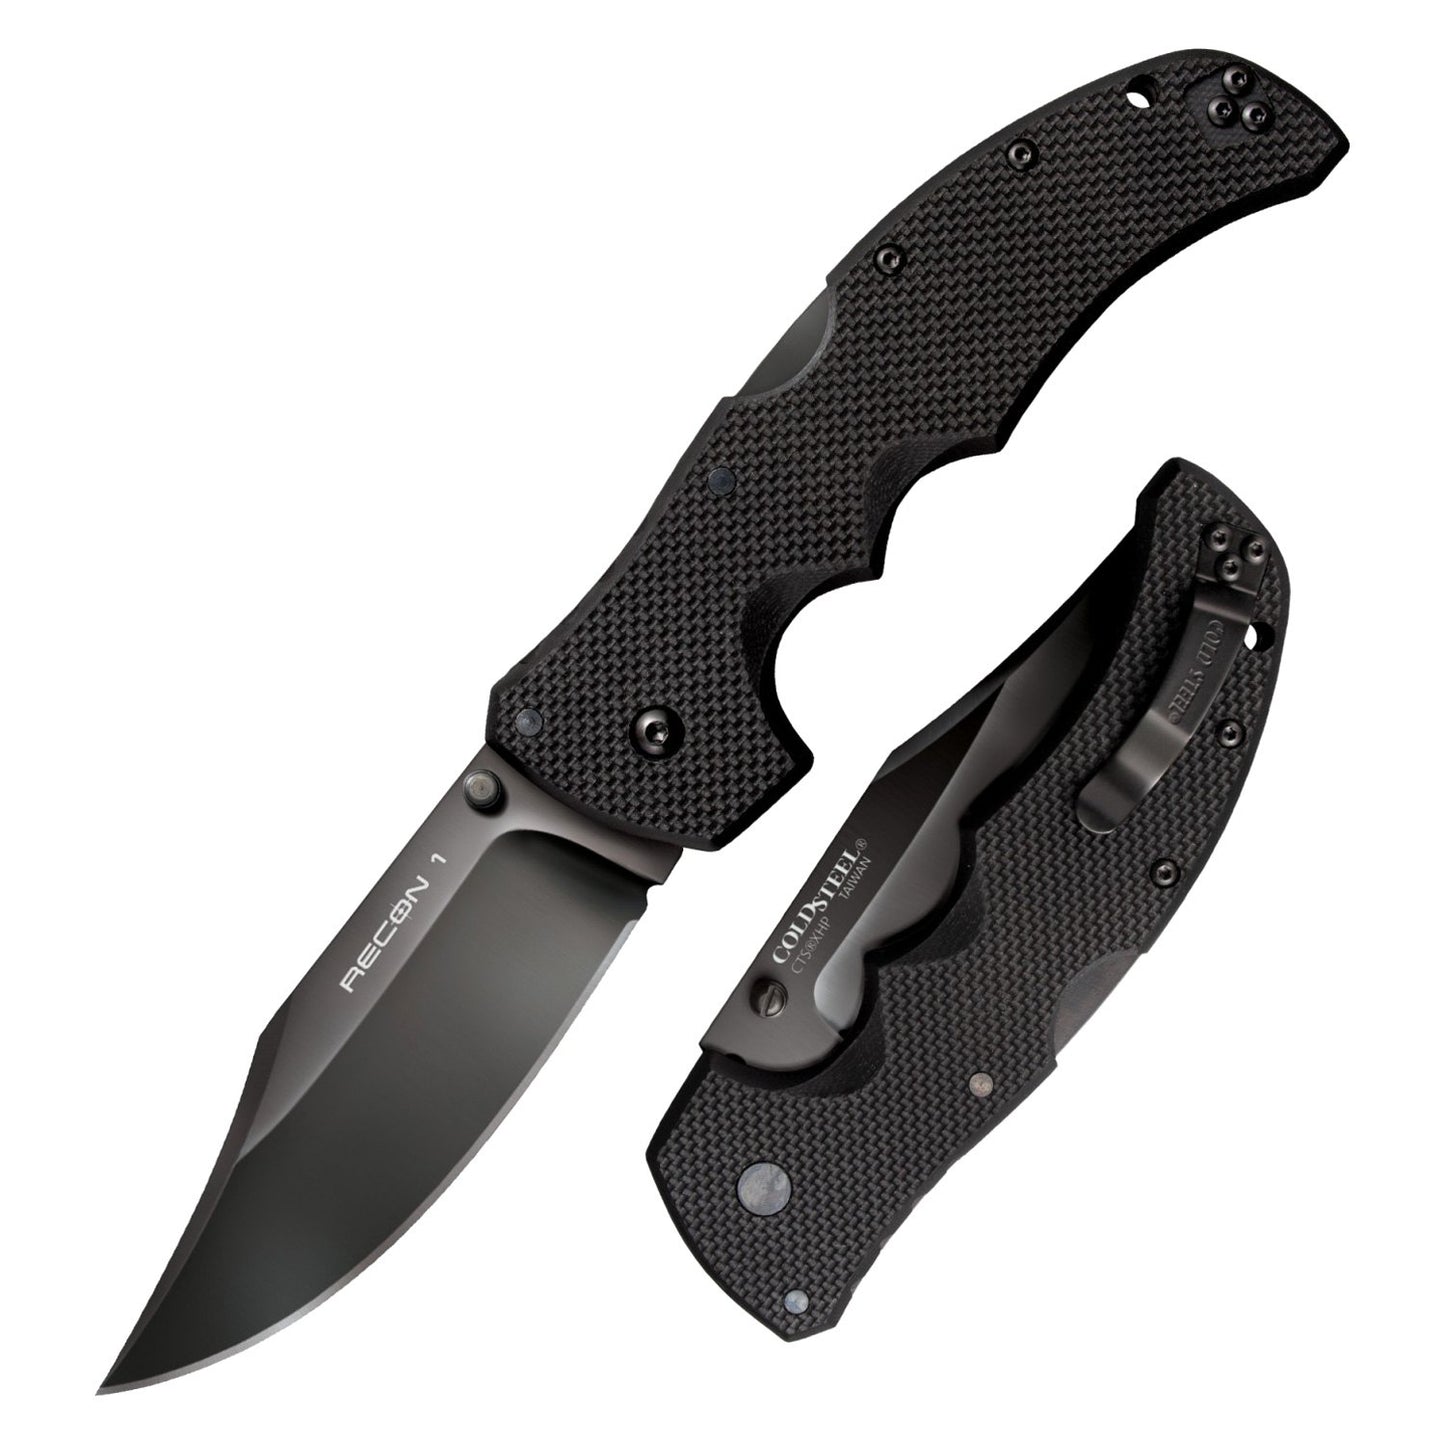 Cold Steel Recon 1 All Black Series Tactical Folding Knife with Tri-Ad Lock and Pocket Clip - Made with Premium Stainless Steel - Spear Point